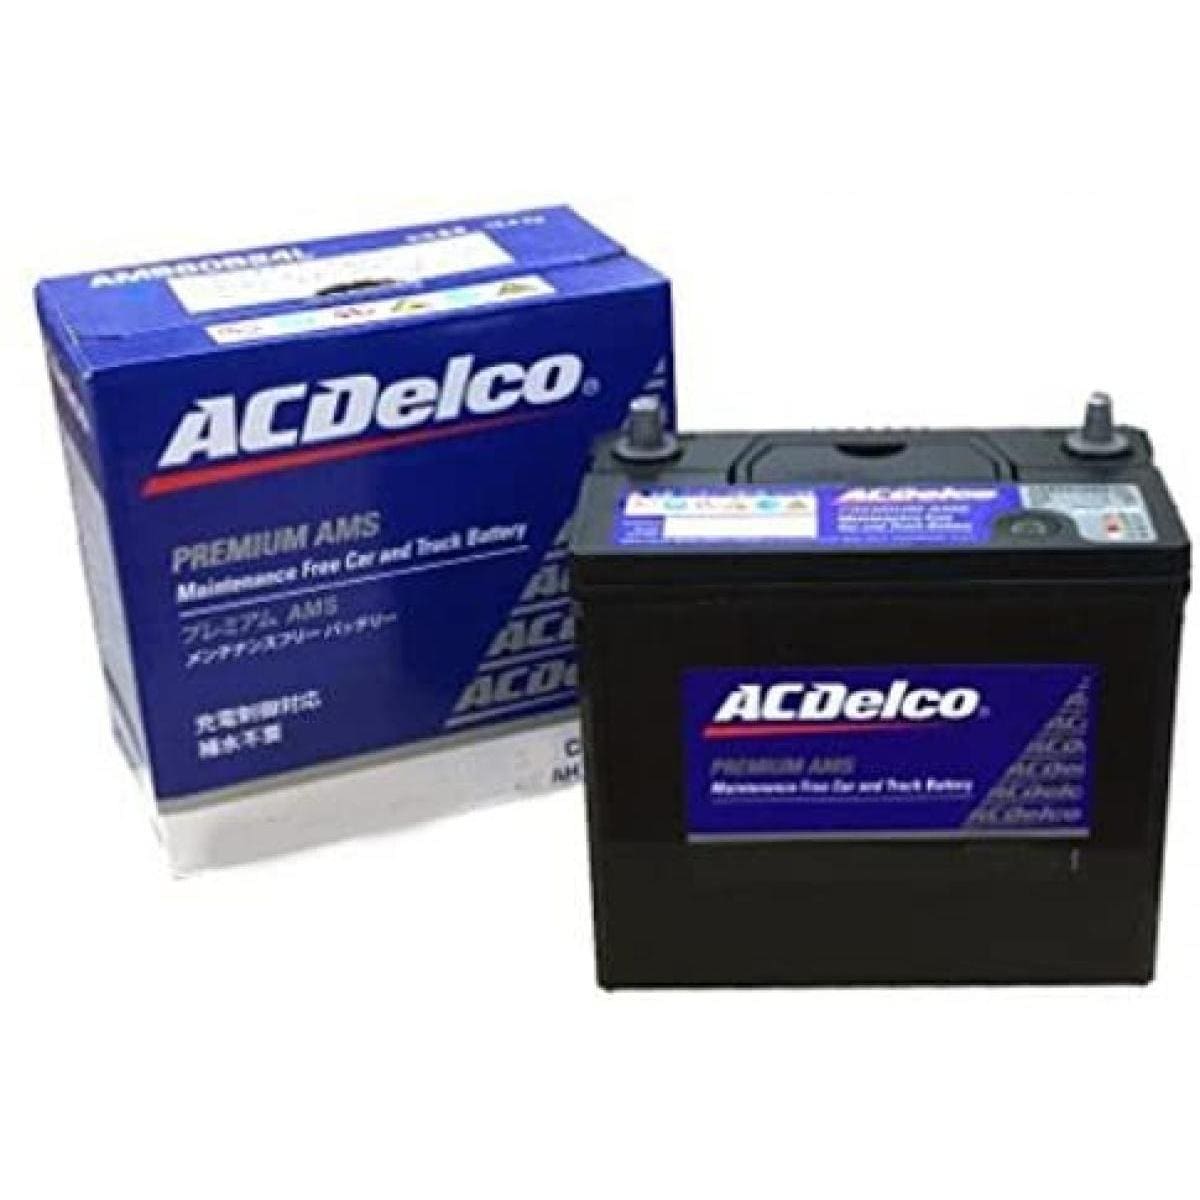 ACDelco ACデルコ バッテリー レクサス IS GSE25 プレミアムSMF SMF75D23L カーバッテリー LEXUS ACDelco